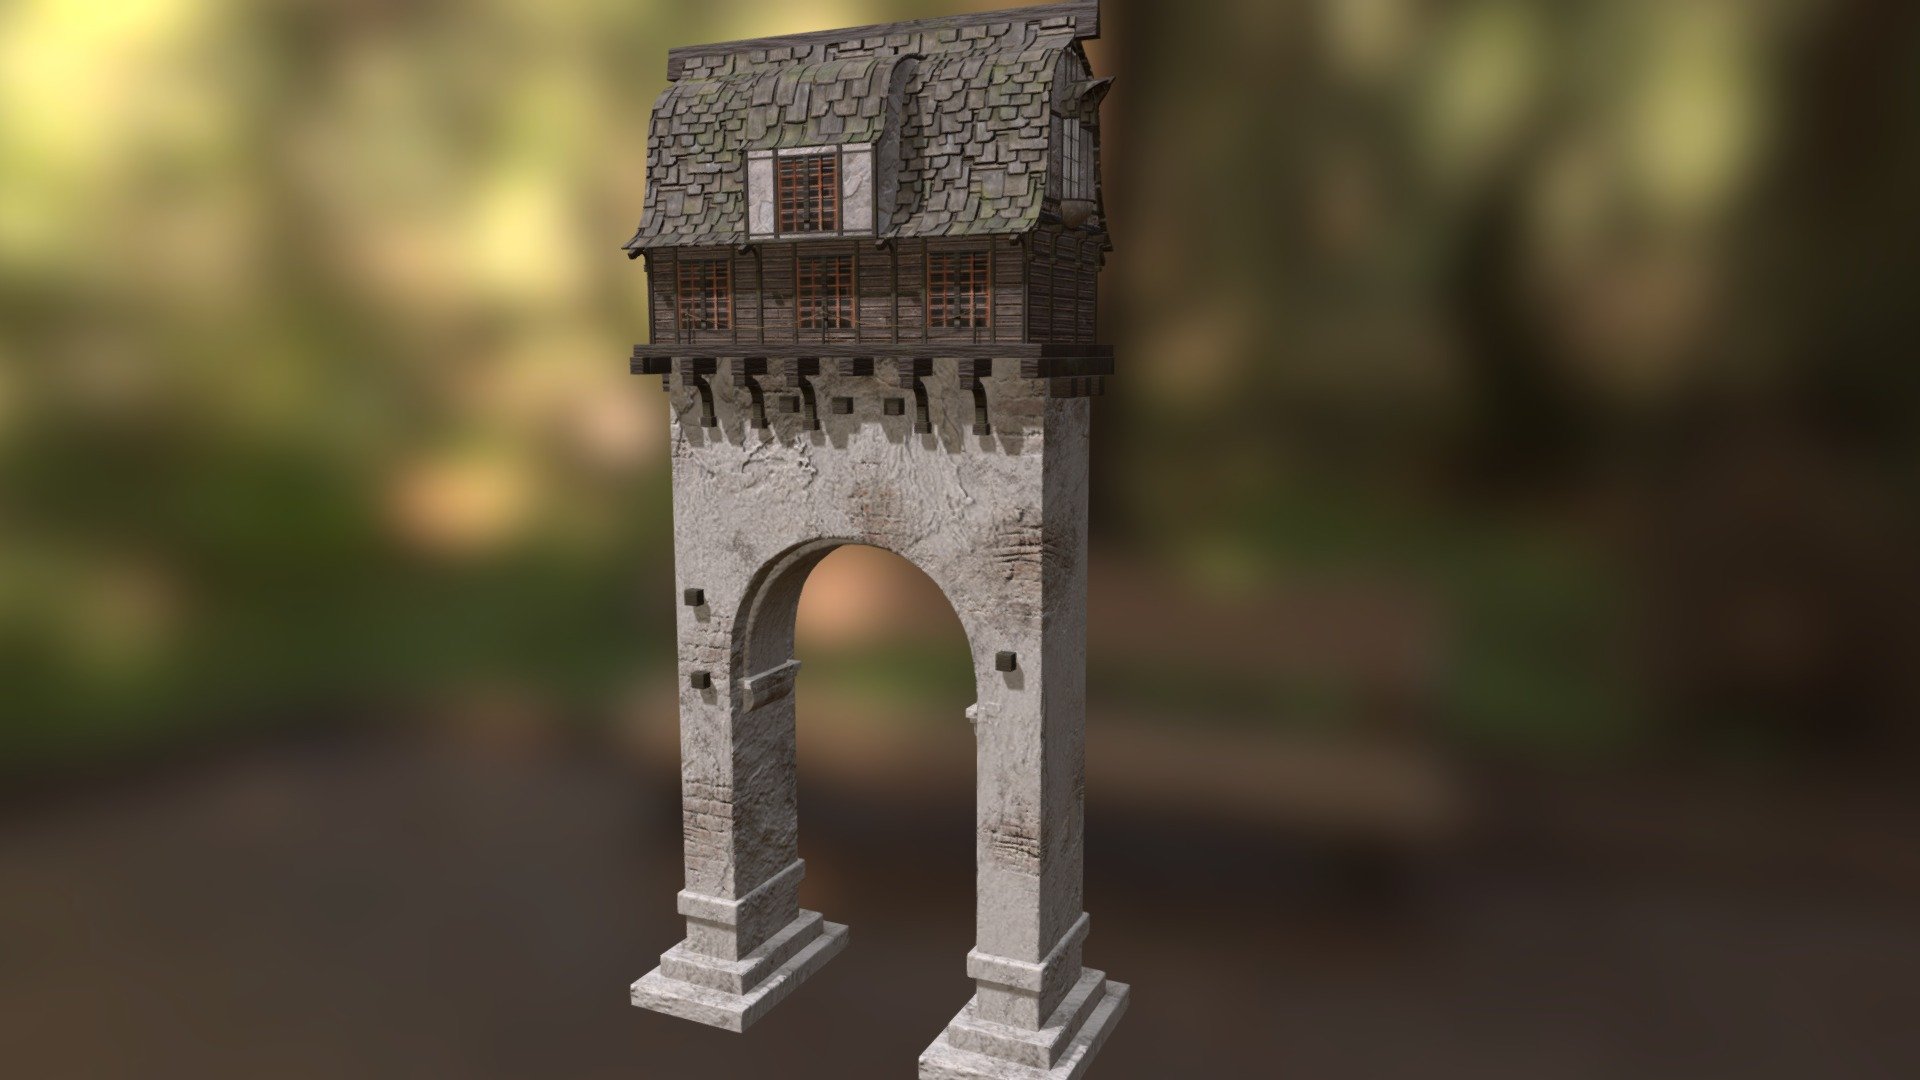 Modeled with 3DS Max, Blender sculpting, Substance Painter

Inspired by these tutorial videos, though not followed specifically: https://www.youtube.com/watch?v=1KsVixIPPbg - Fantasy Medieval Gatehouse - 3D model by Experience Heritage (@experience-heritage) 3d model